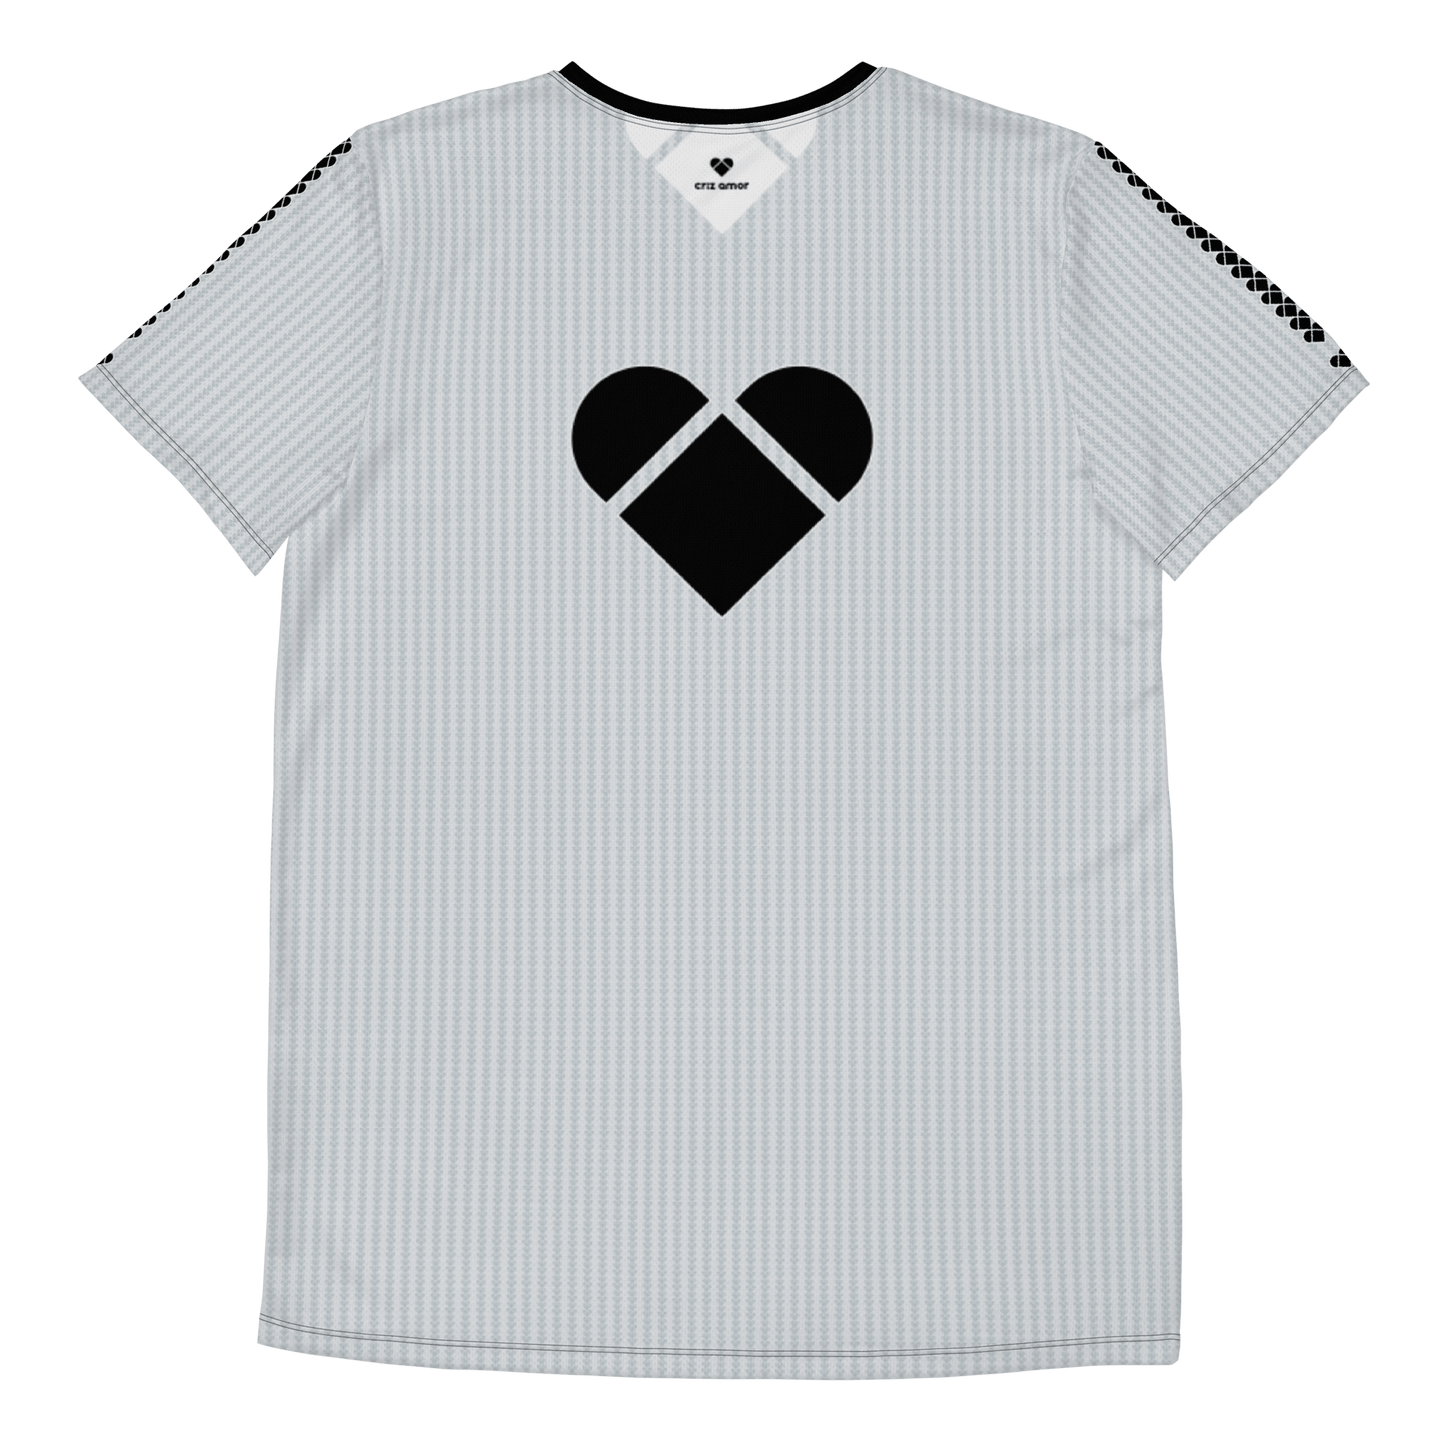 Gym wear must-have: light gray sport shirt with black heart and heart logo stripe on sleeves for men from CRiZ AMOR's Amor Primero Collection, back photo view